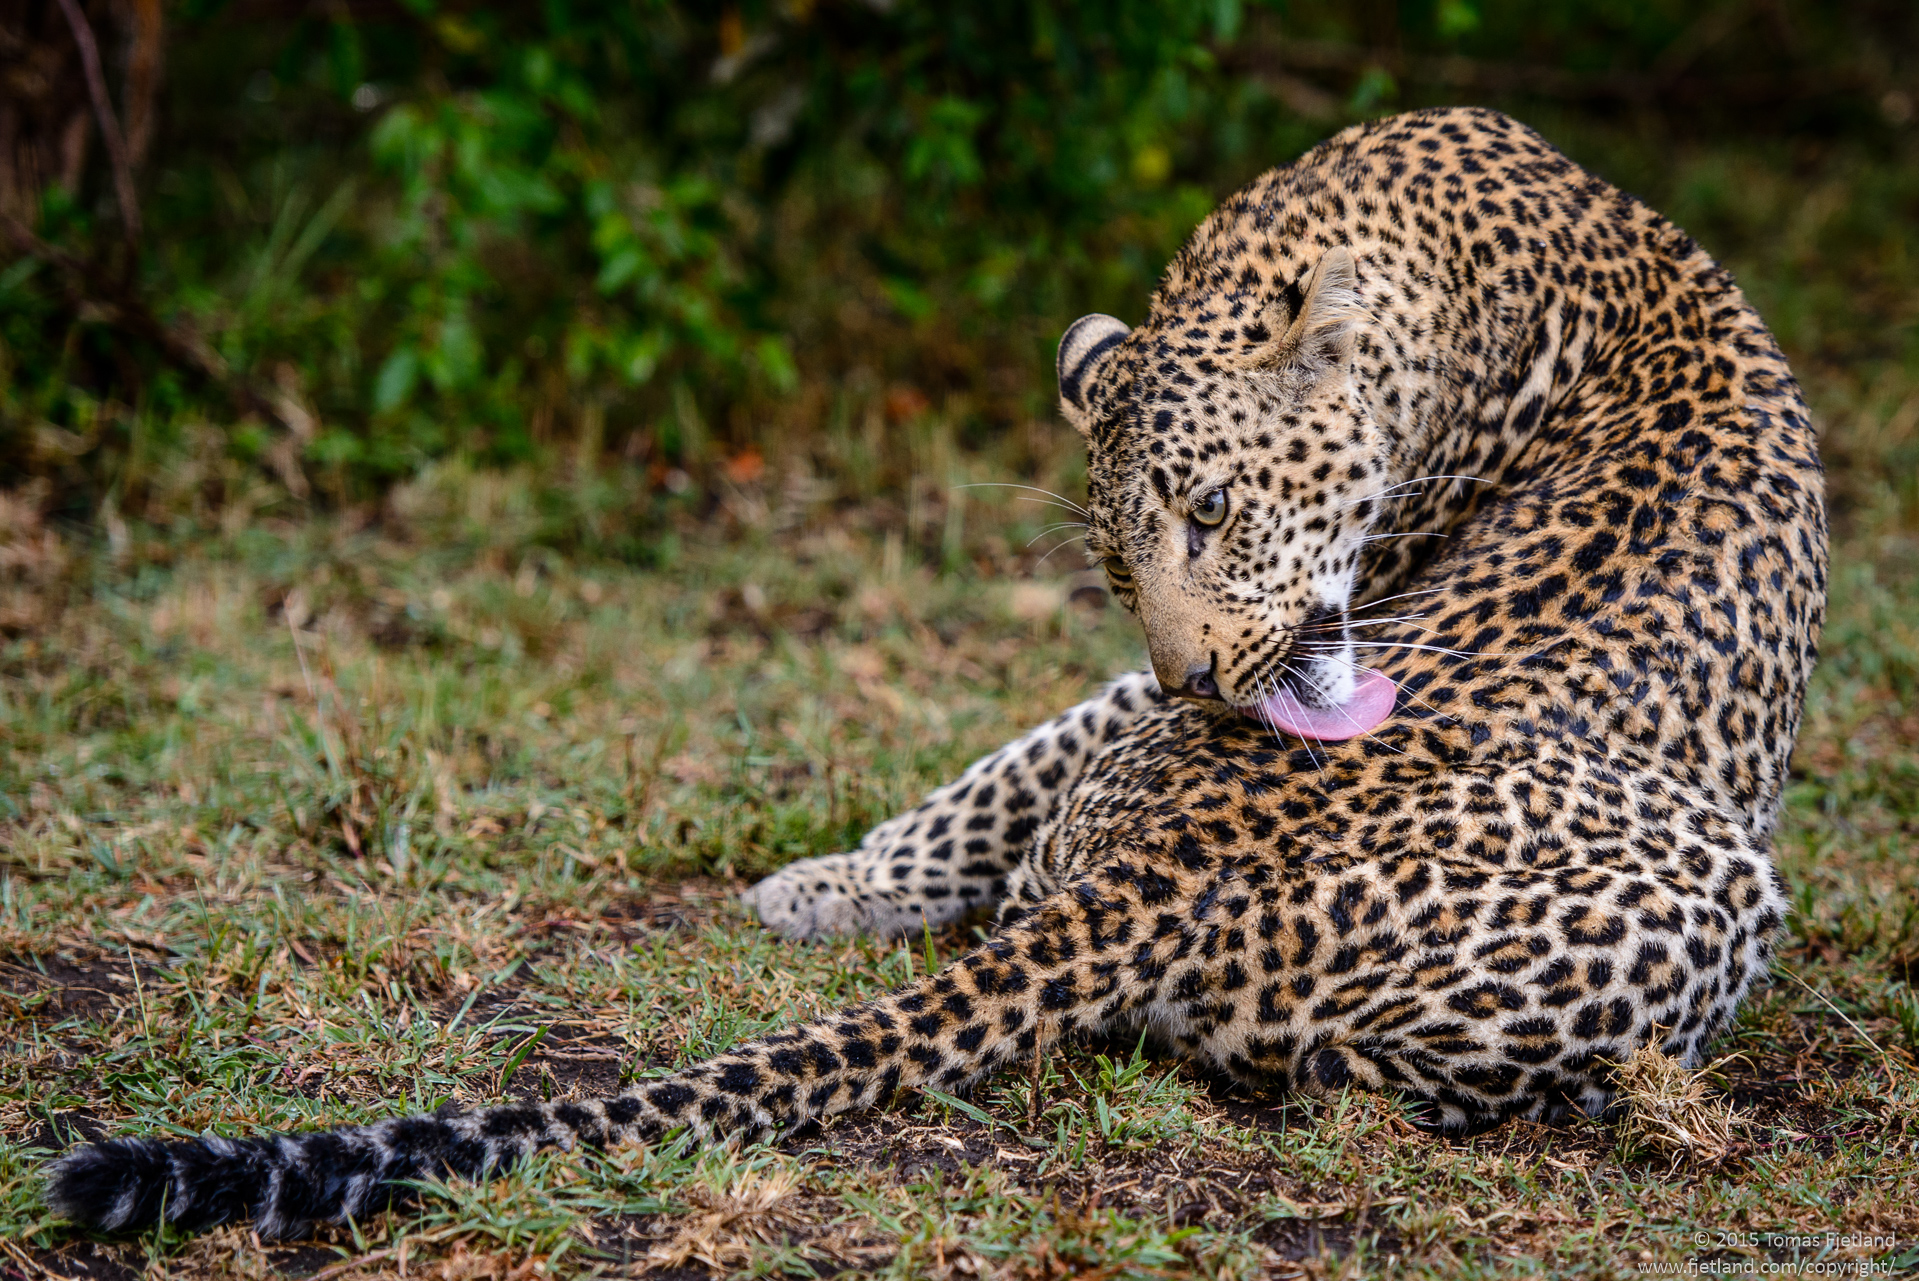 Fig the leopard licking rainwater off her fur